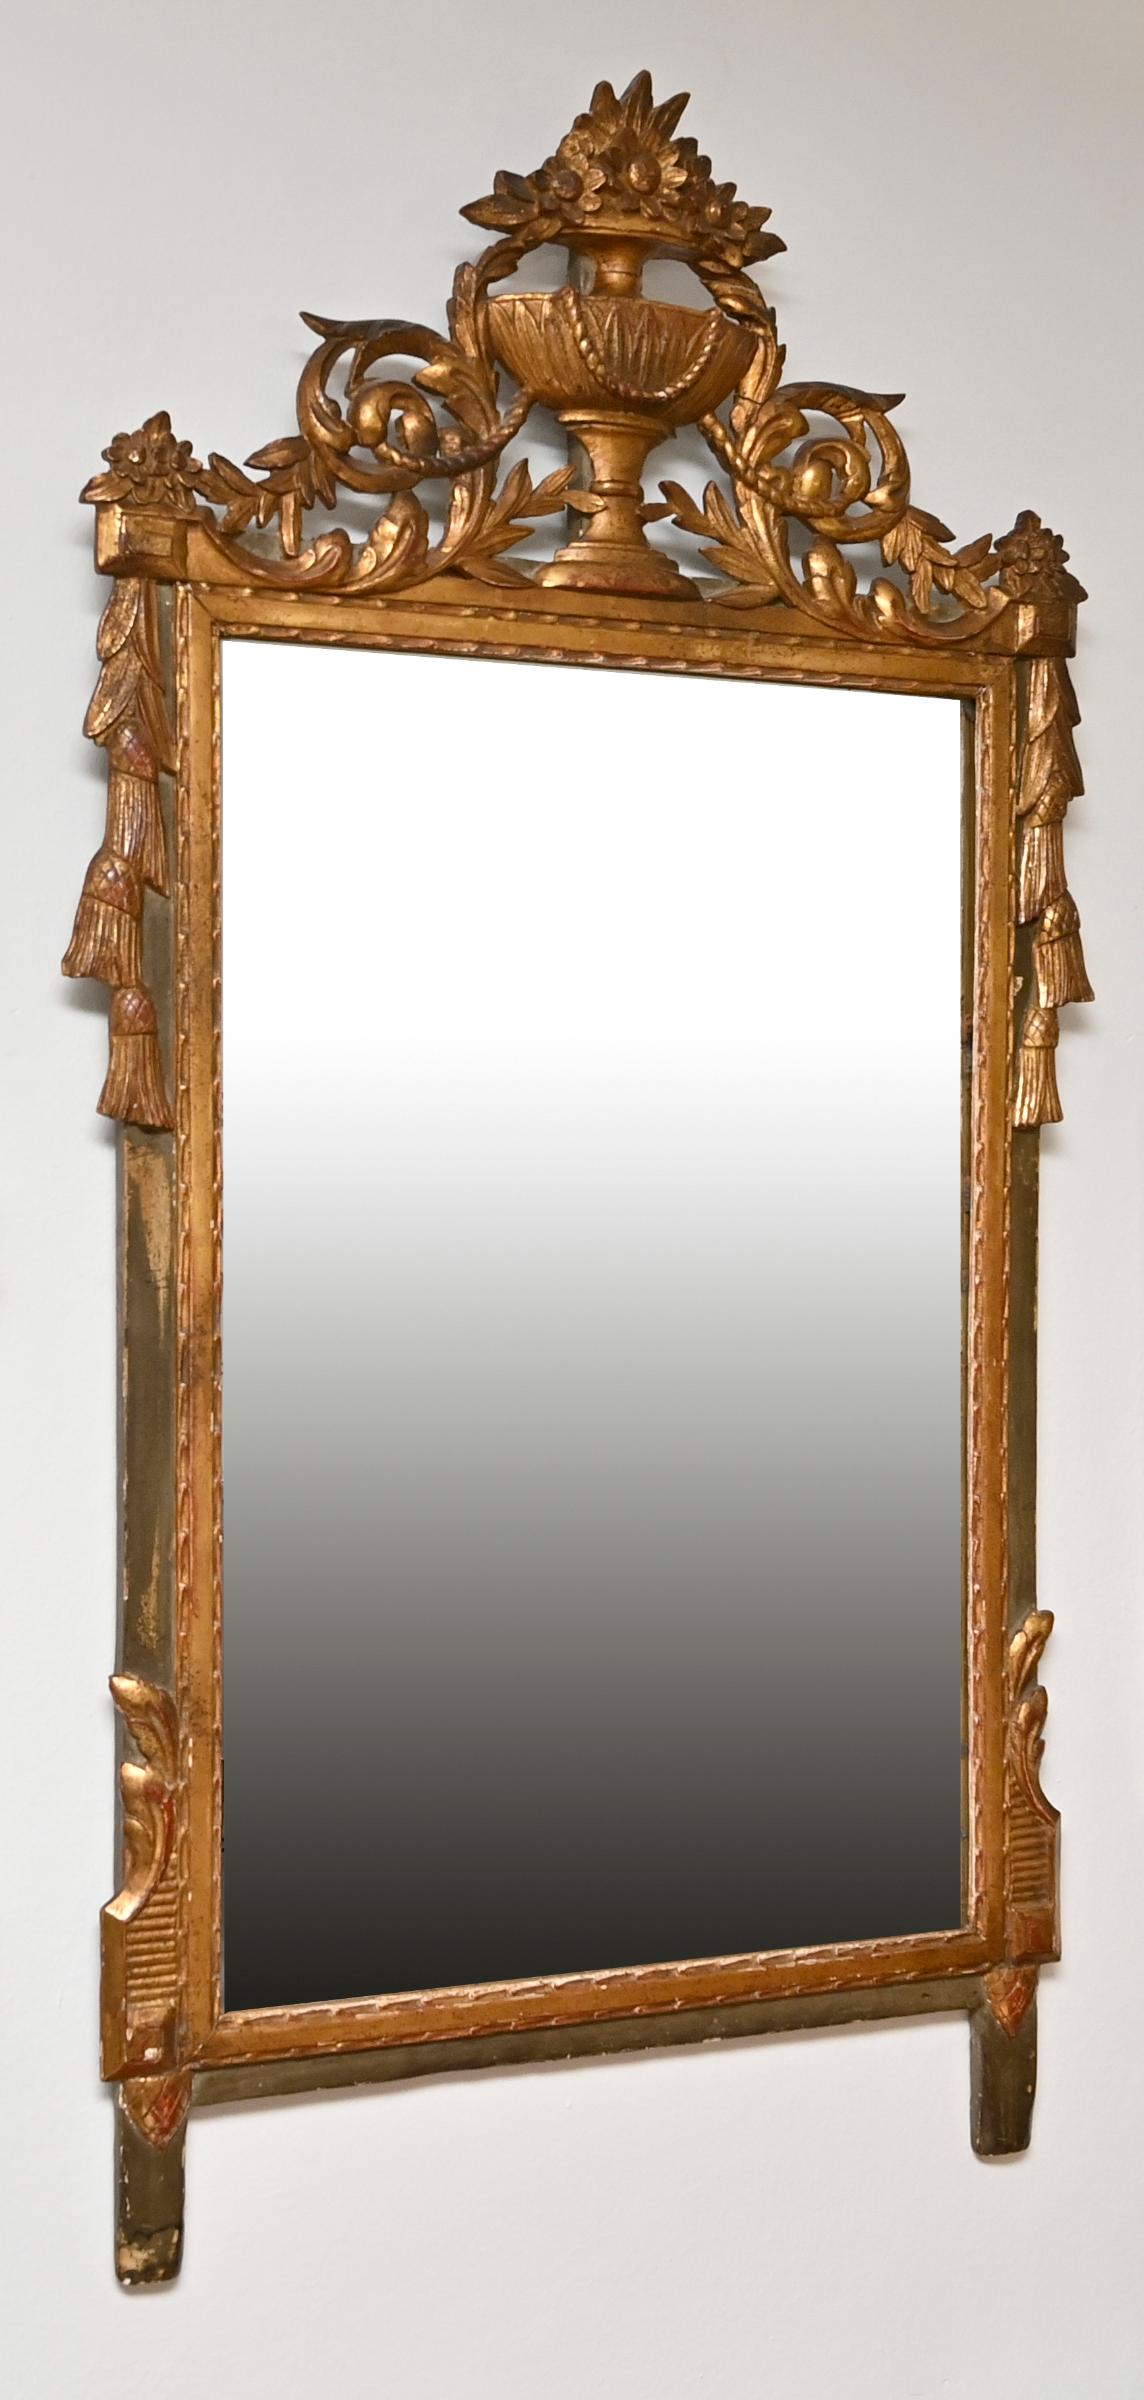 Louis XVI 18th Century French Mirror Louis Seize Gilded Wood Carved Original Mirror Glass For Sale